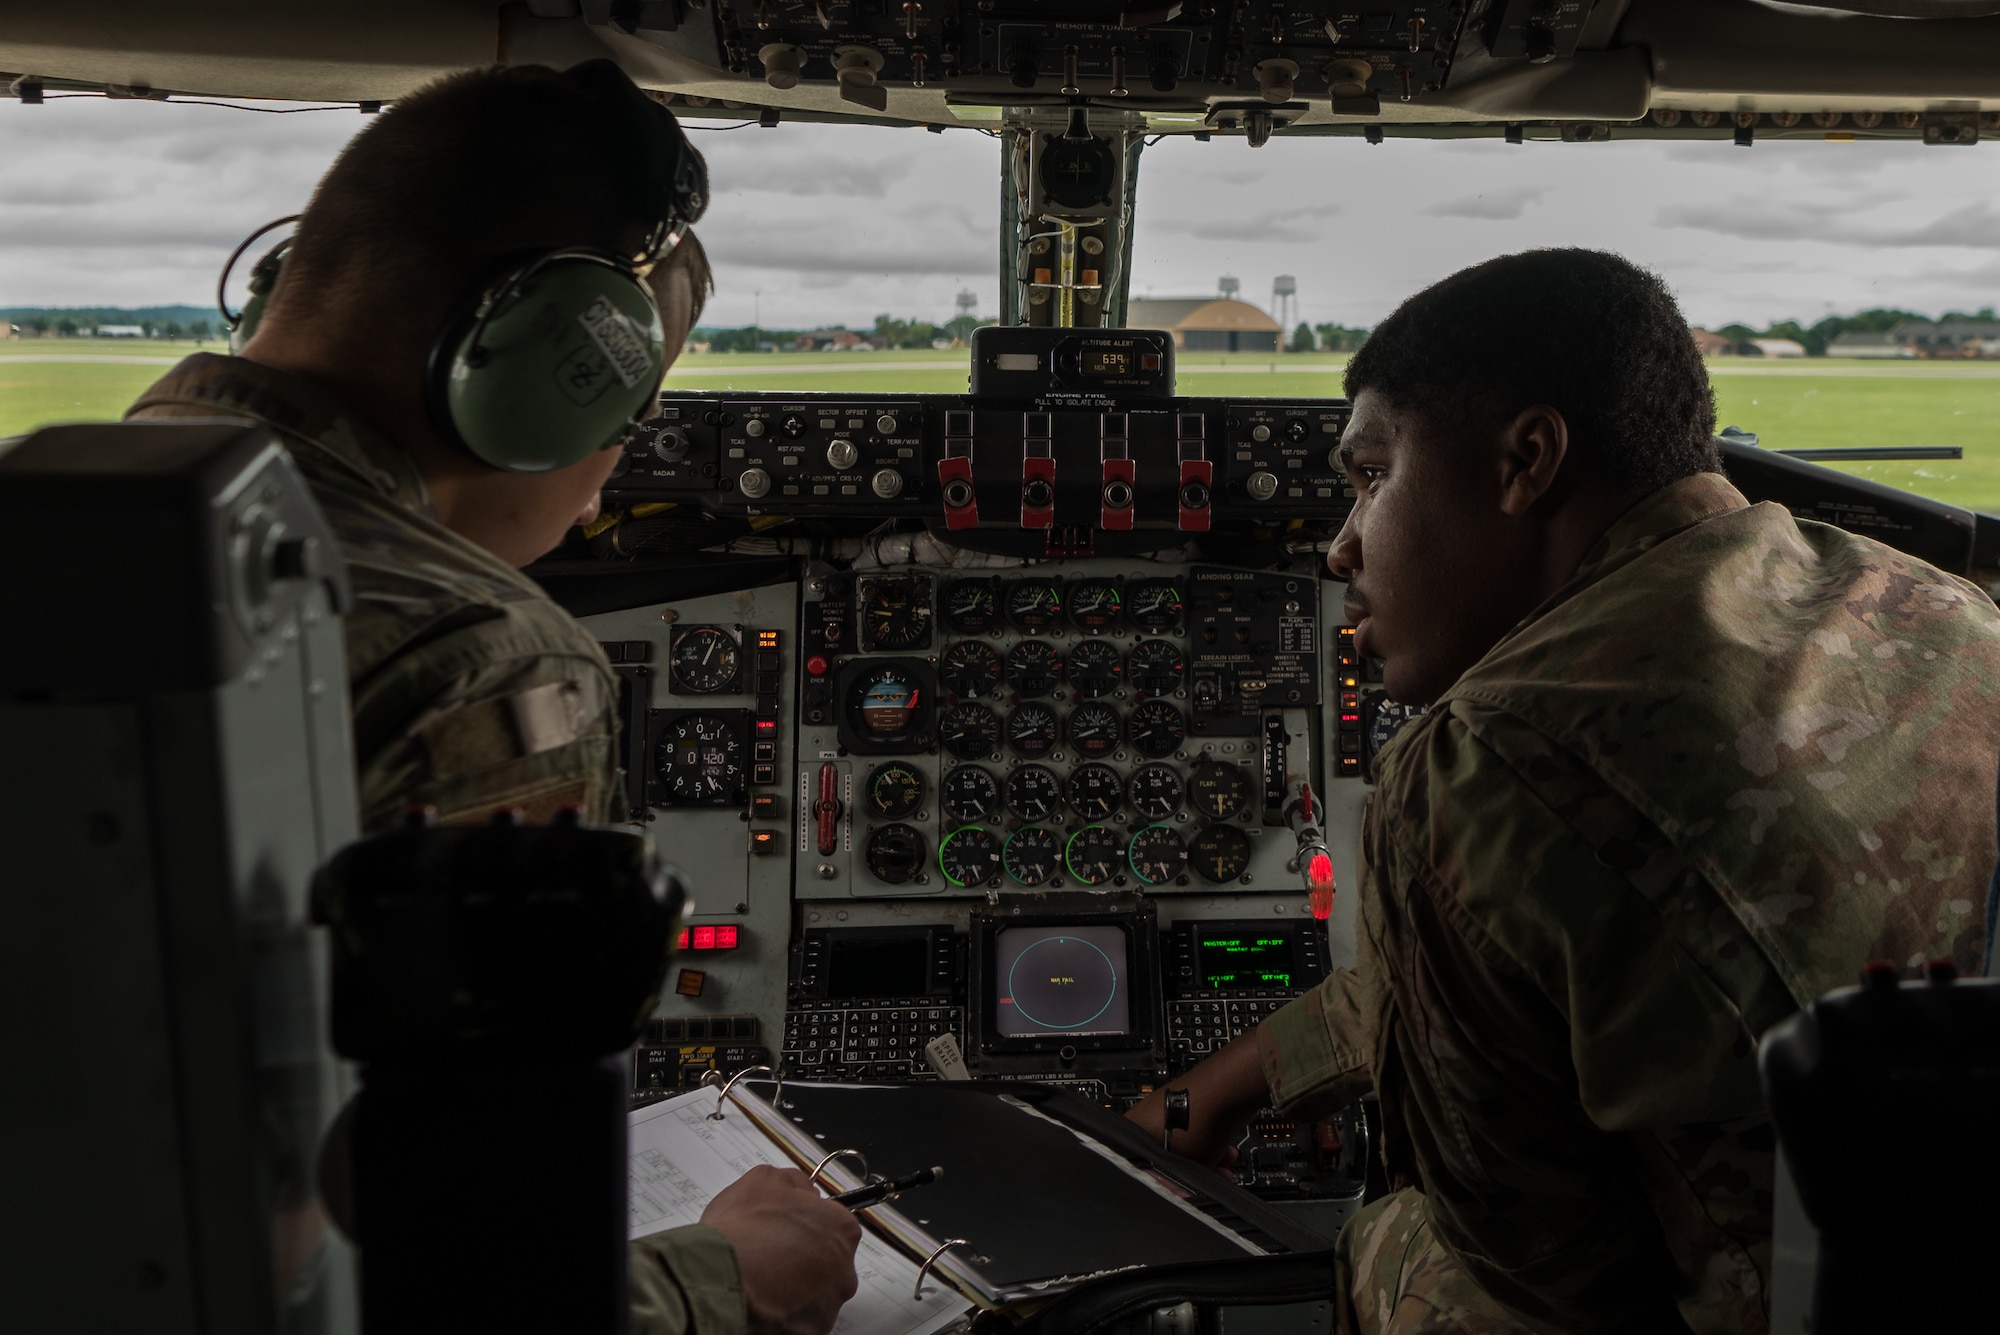 U.S. Air Force Senior Airman Sabian Scott, 906th Air Refueling Squadron KC-135 Stratotanker aerospace maintenance journeyman, and U.S. Air National Guard Airman 1st Class Brian Okoniewski 126th ARS  KC-135 aerospace maintenance journeyman, inspect the refueling panel inside of a KC-135 on Scott Air Force Base, Illinois, June 2, 2021. The refueling panel allows them to inform the Airmen outside of the aircraft when the aircraft is refueled. (U.S. Air Force photo by Airman 1st Class Mark Sulaica